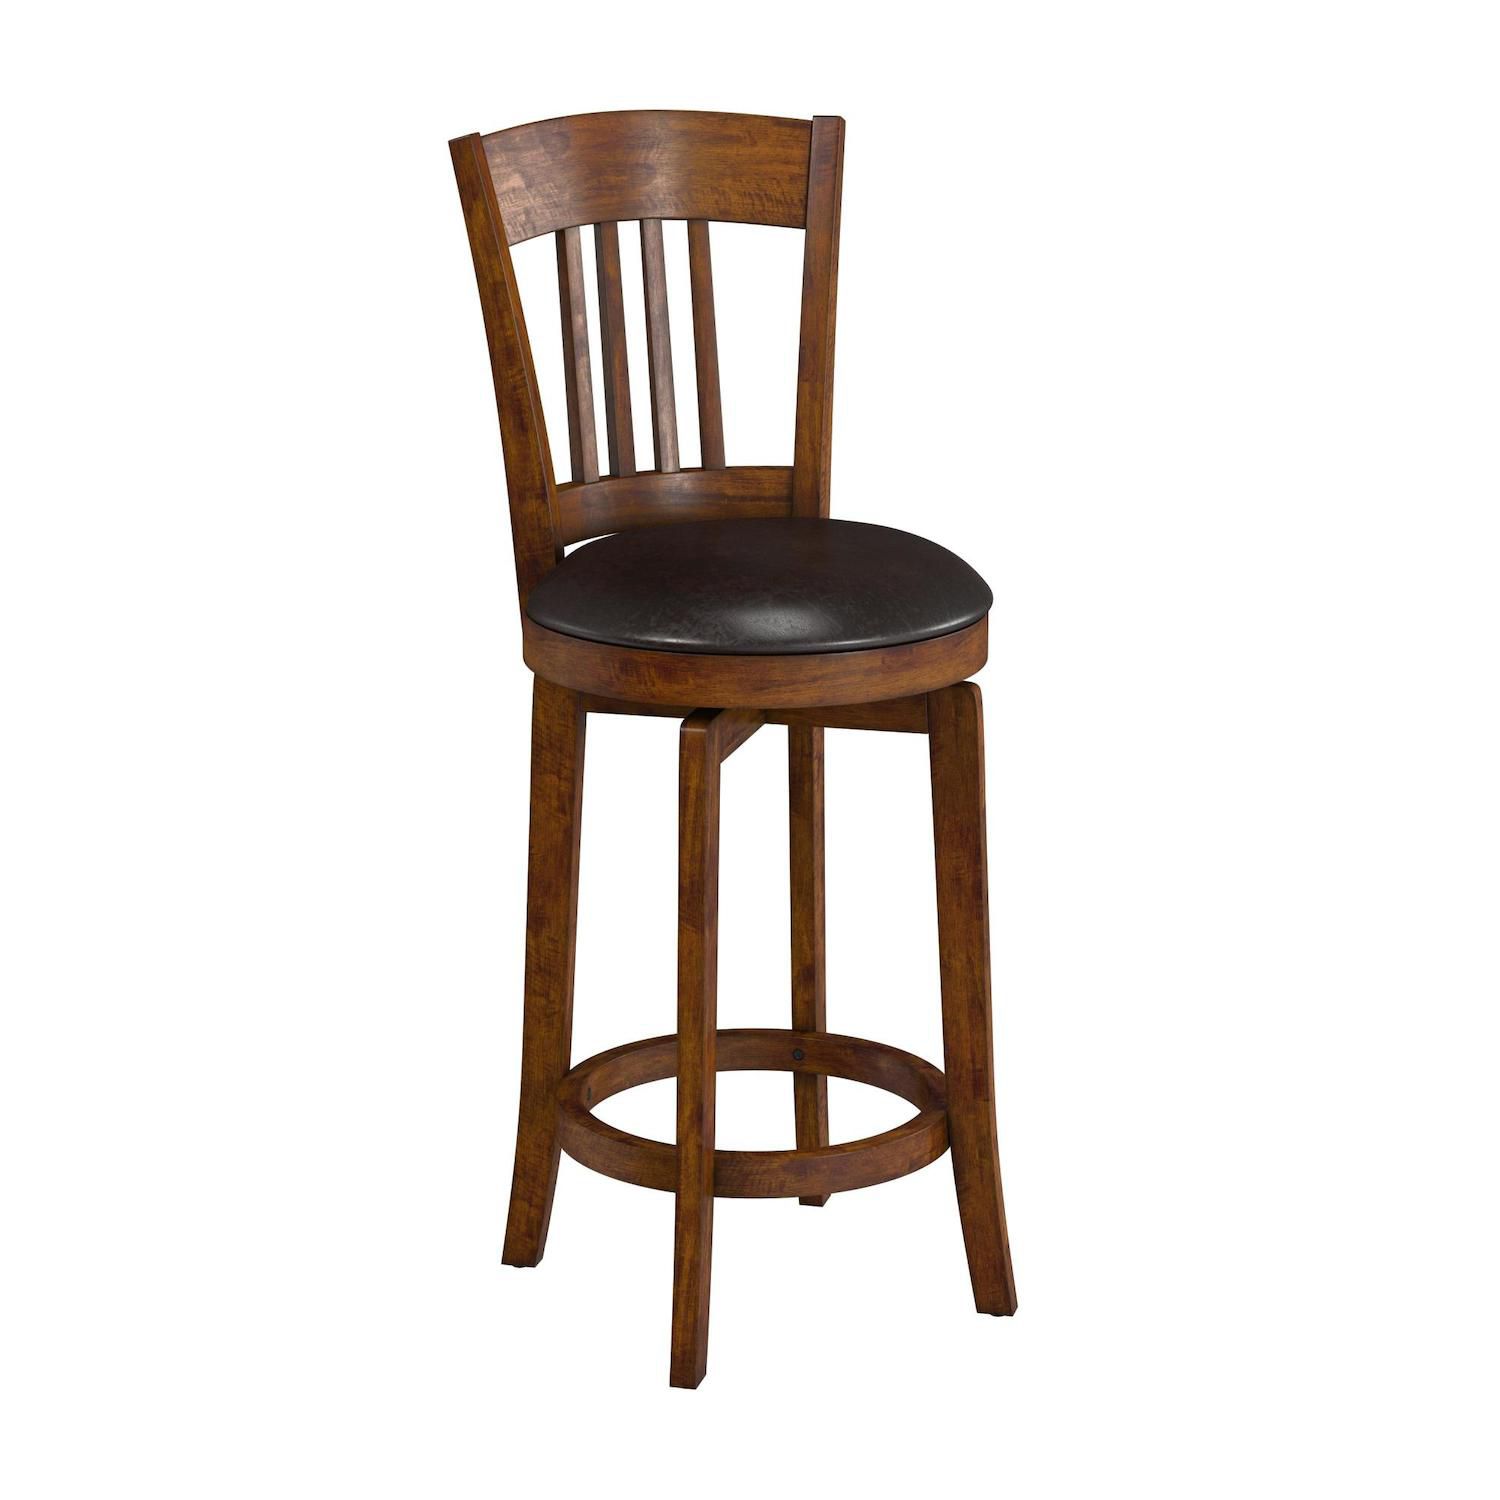 Image for Hillsdale Furniture Canton Swivel Counter Stool at Kohl's.